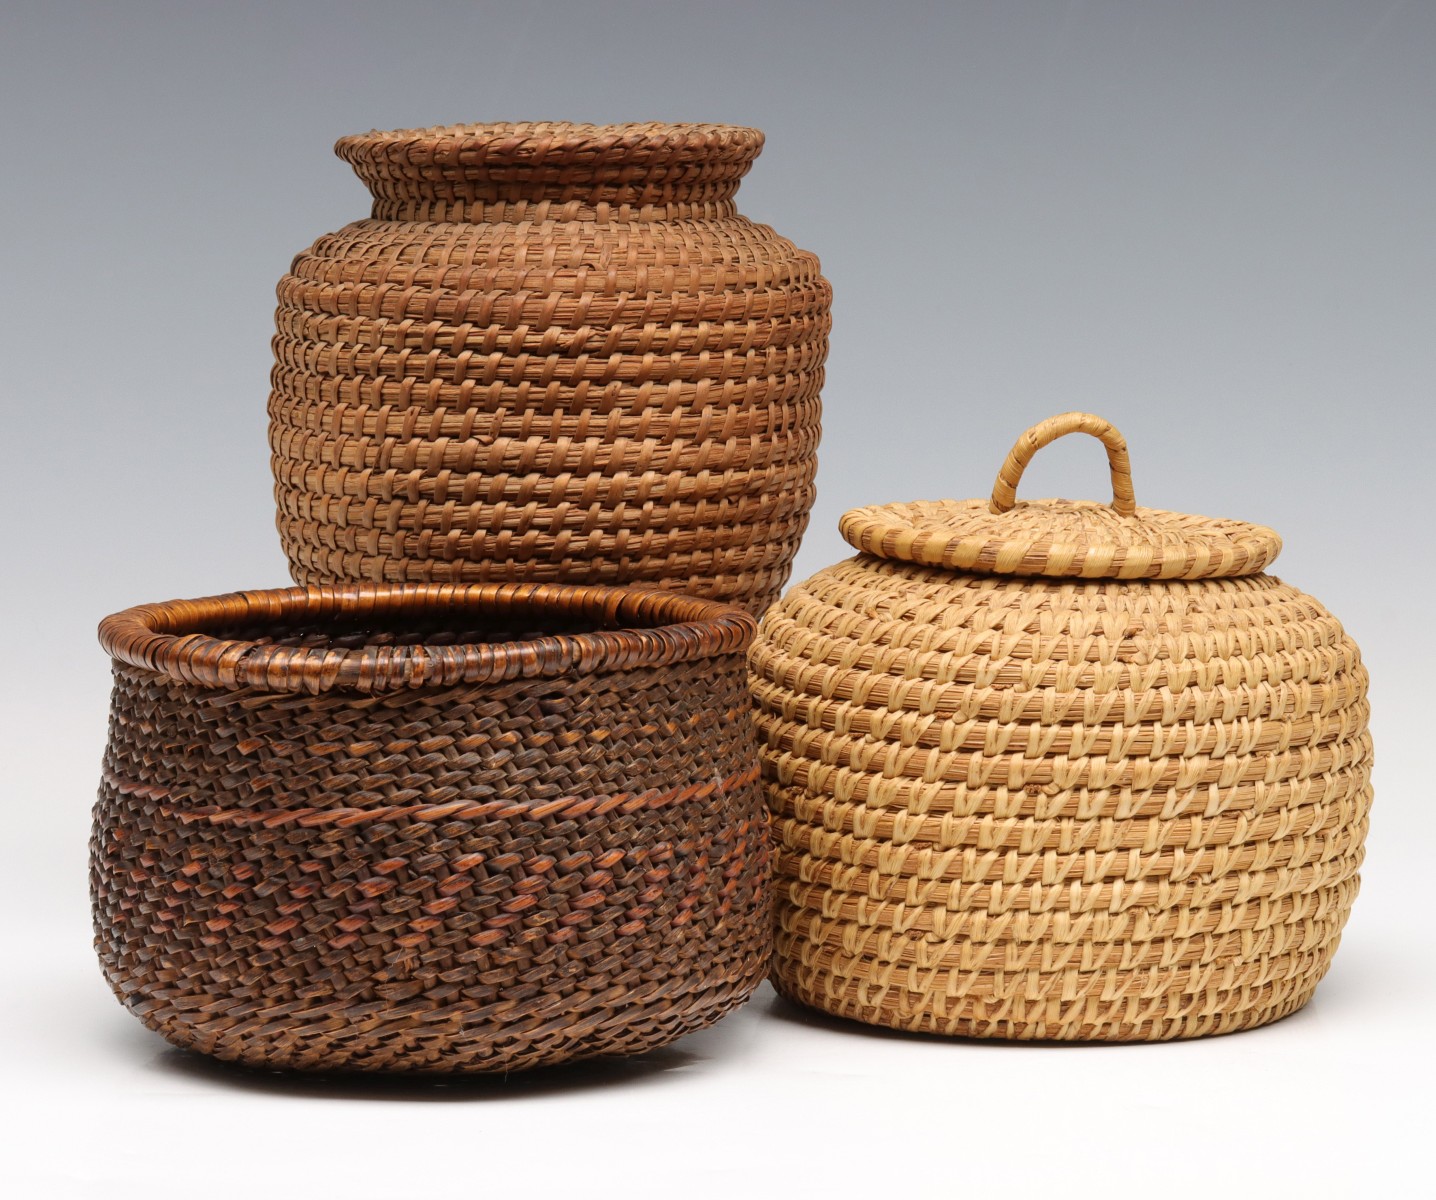 SOUTHEAST SWEET GRASS AND NW COAST COILED ROD BASKETS